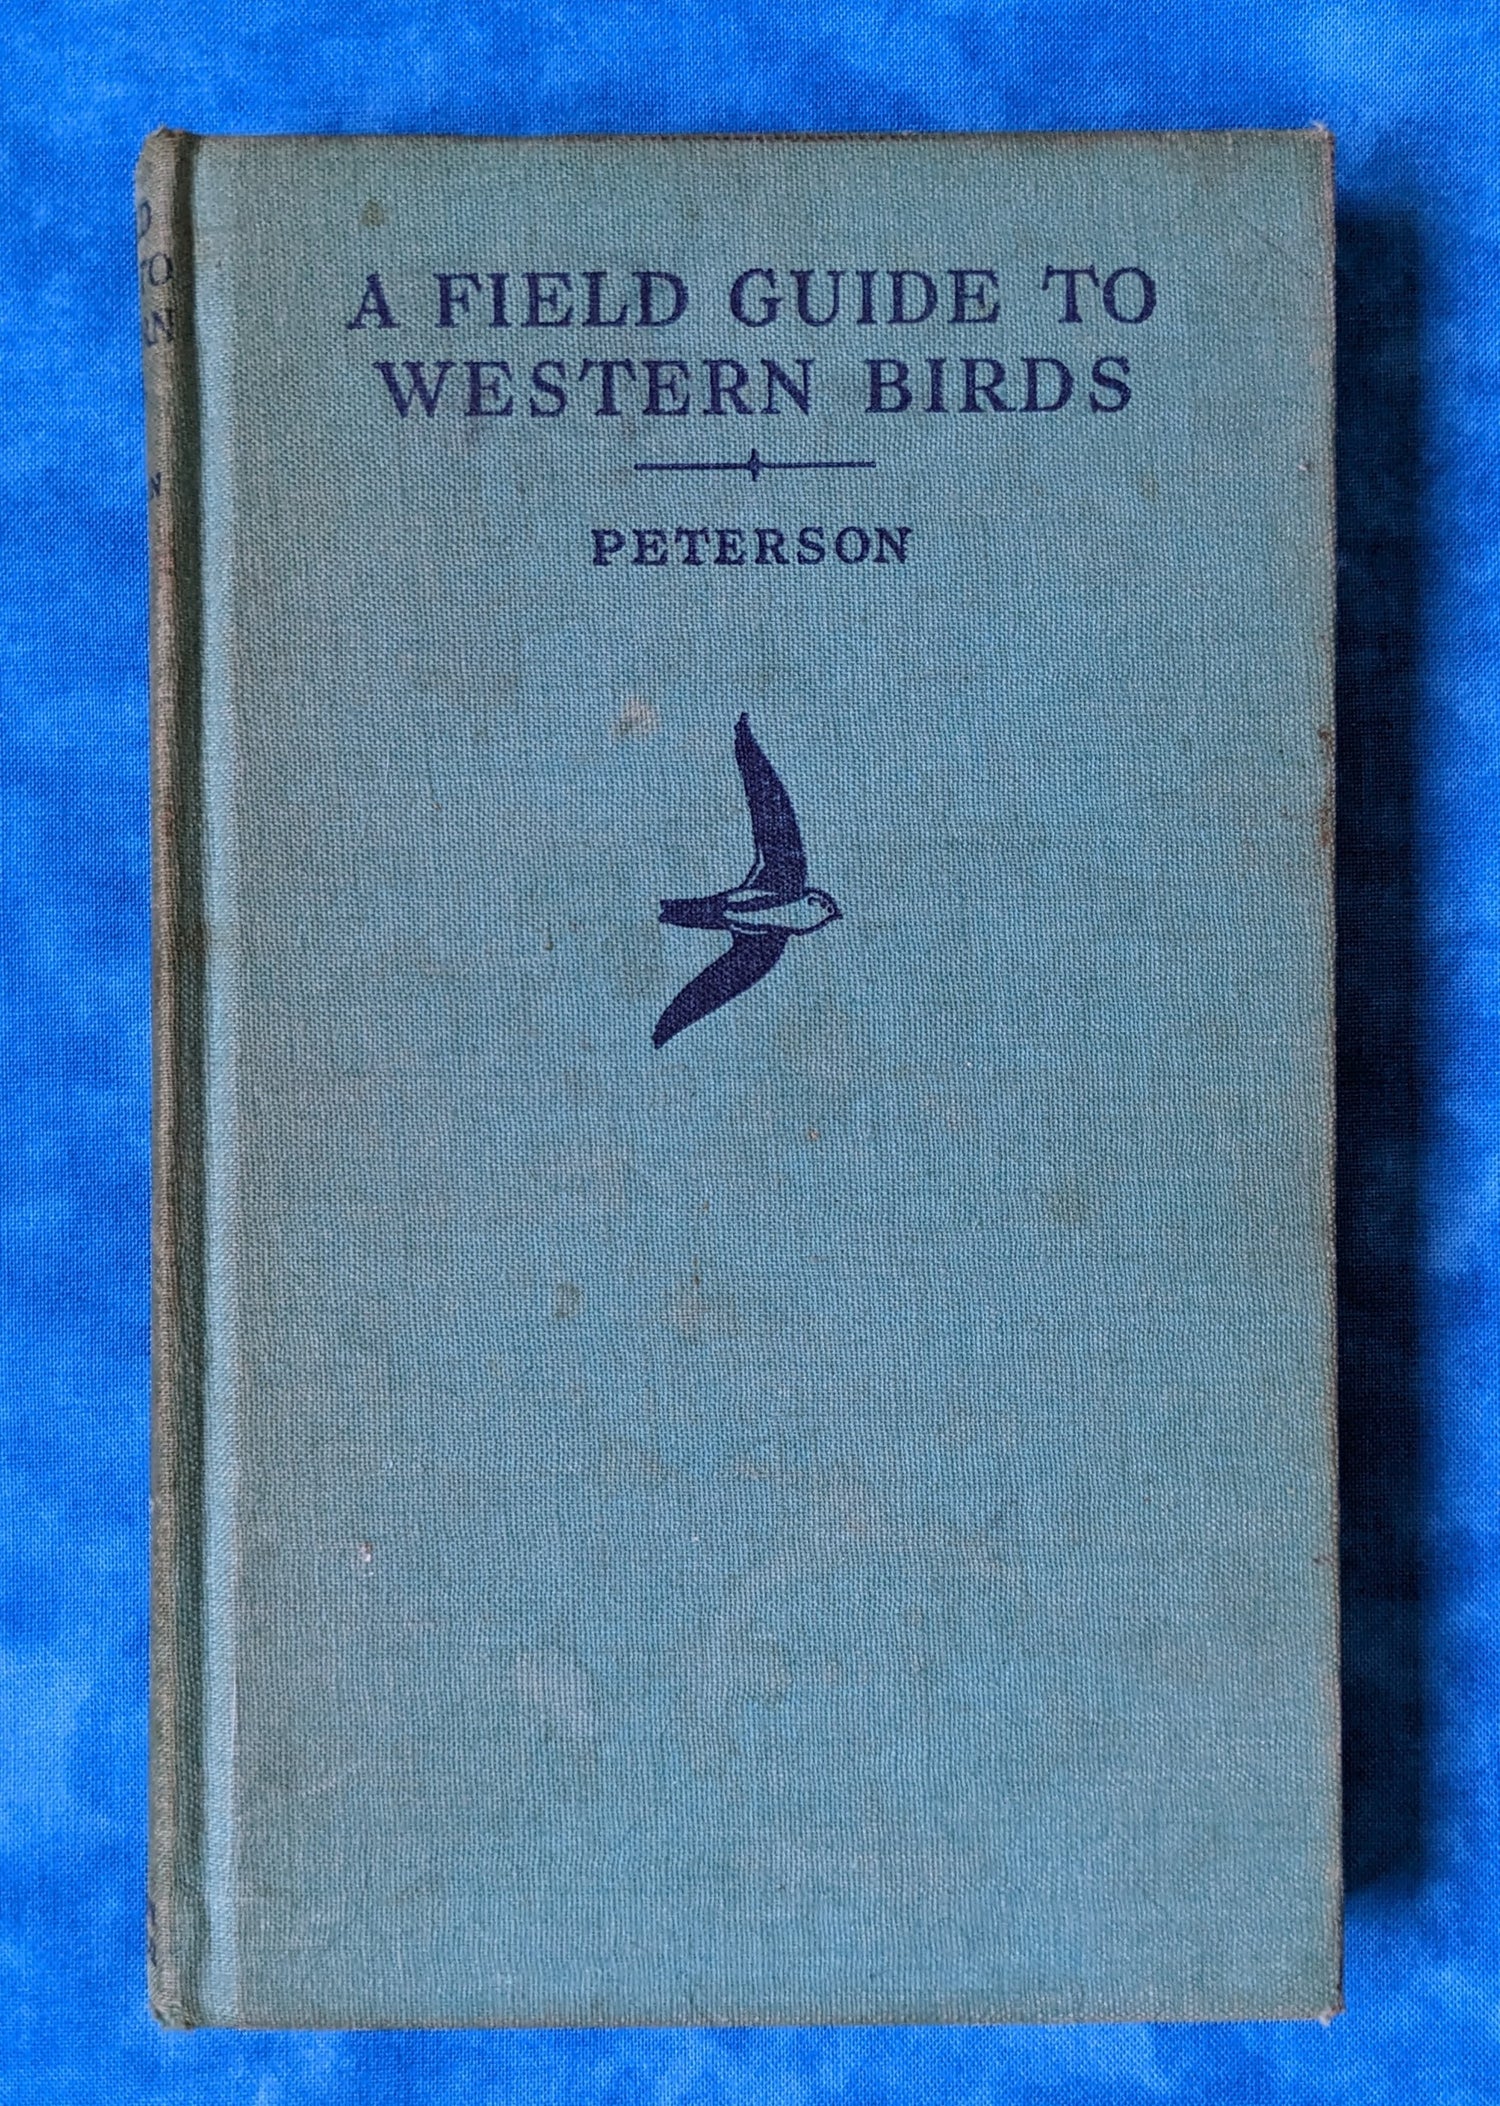 A Field Guide to Western Birds vintage book front cover